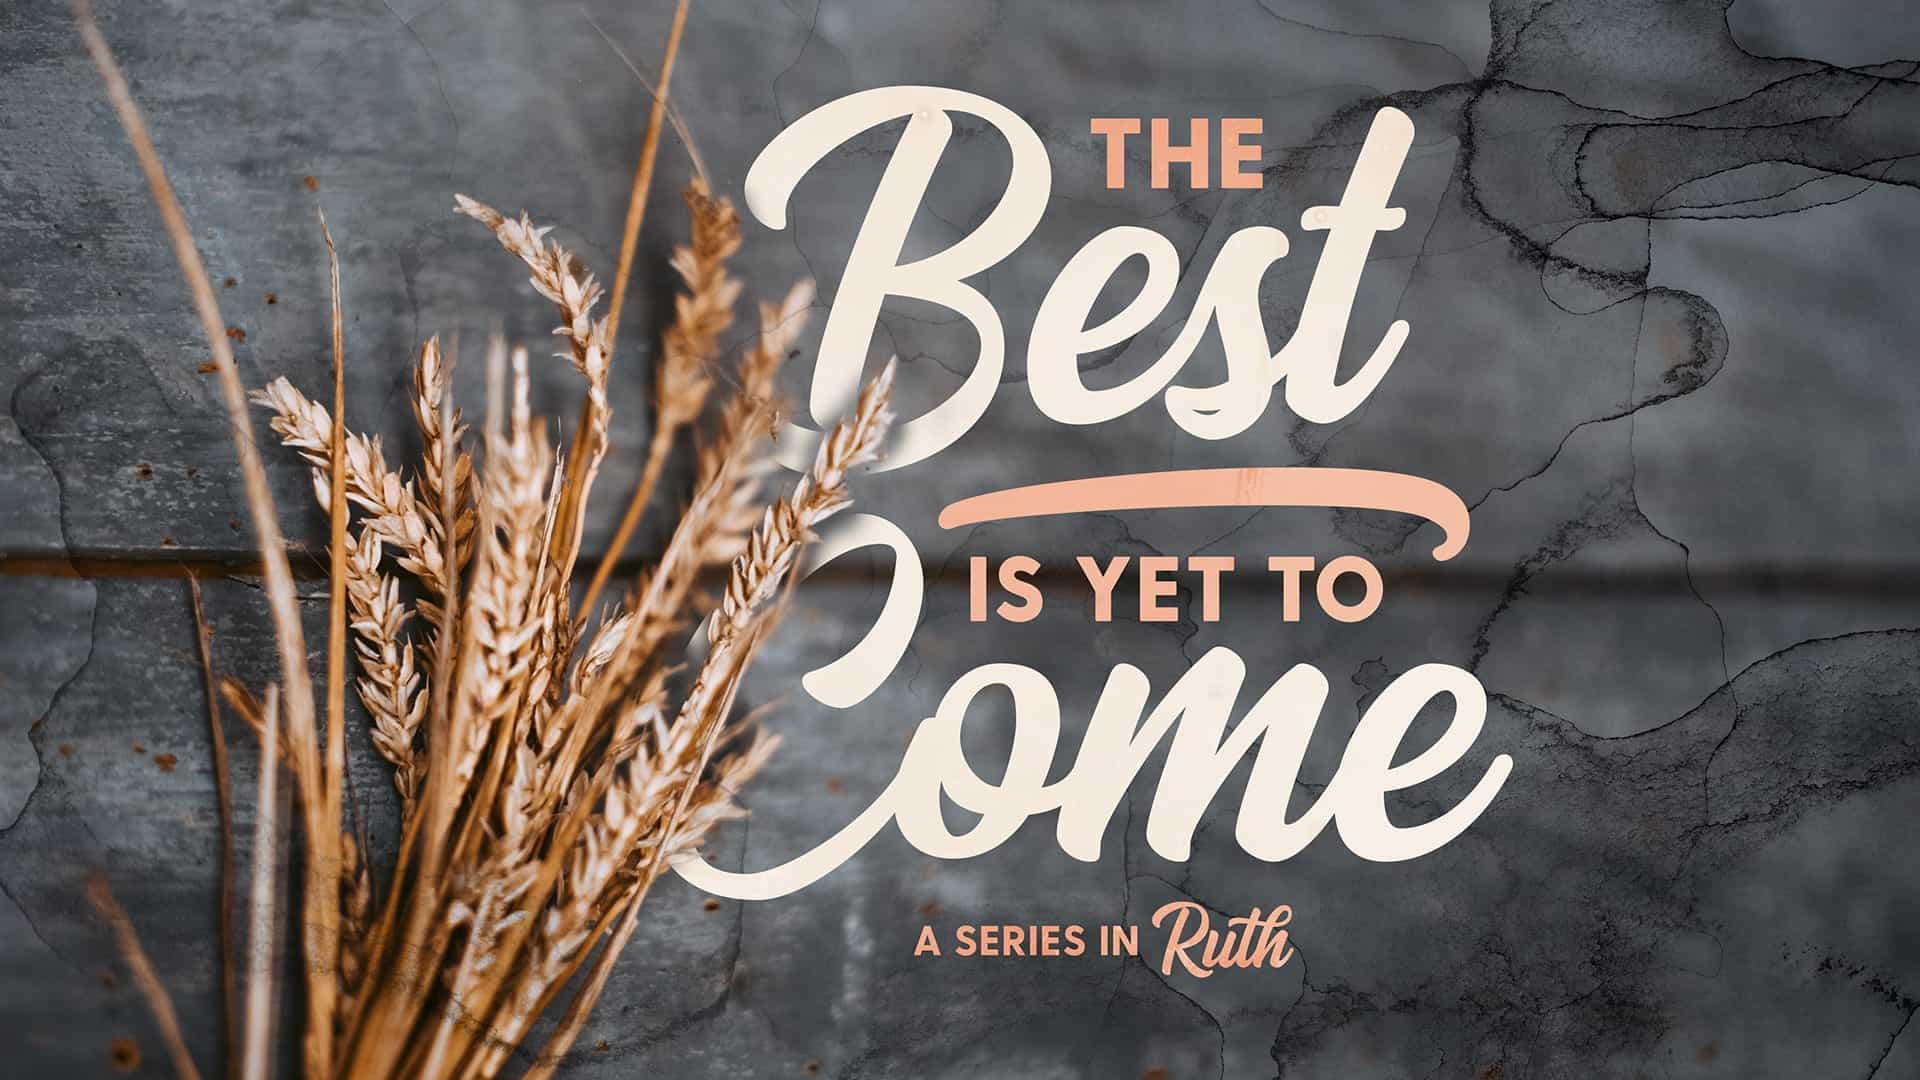 The Best is Yet to Come! The Power of Contentment - 4/5/20 Image